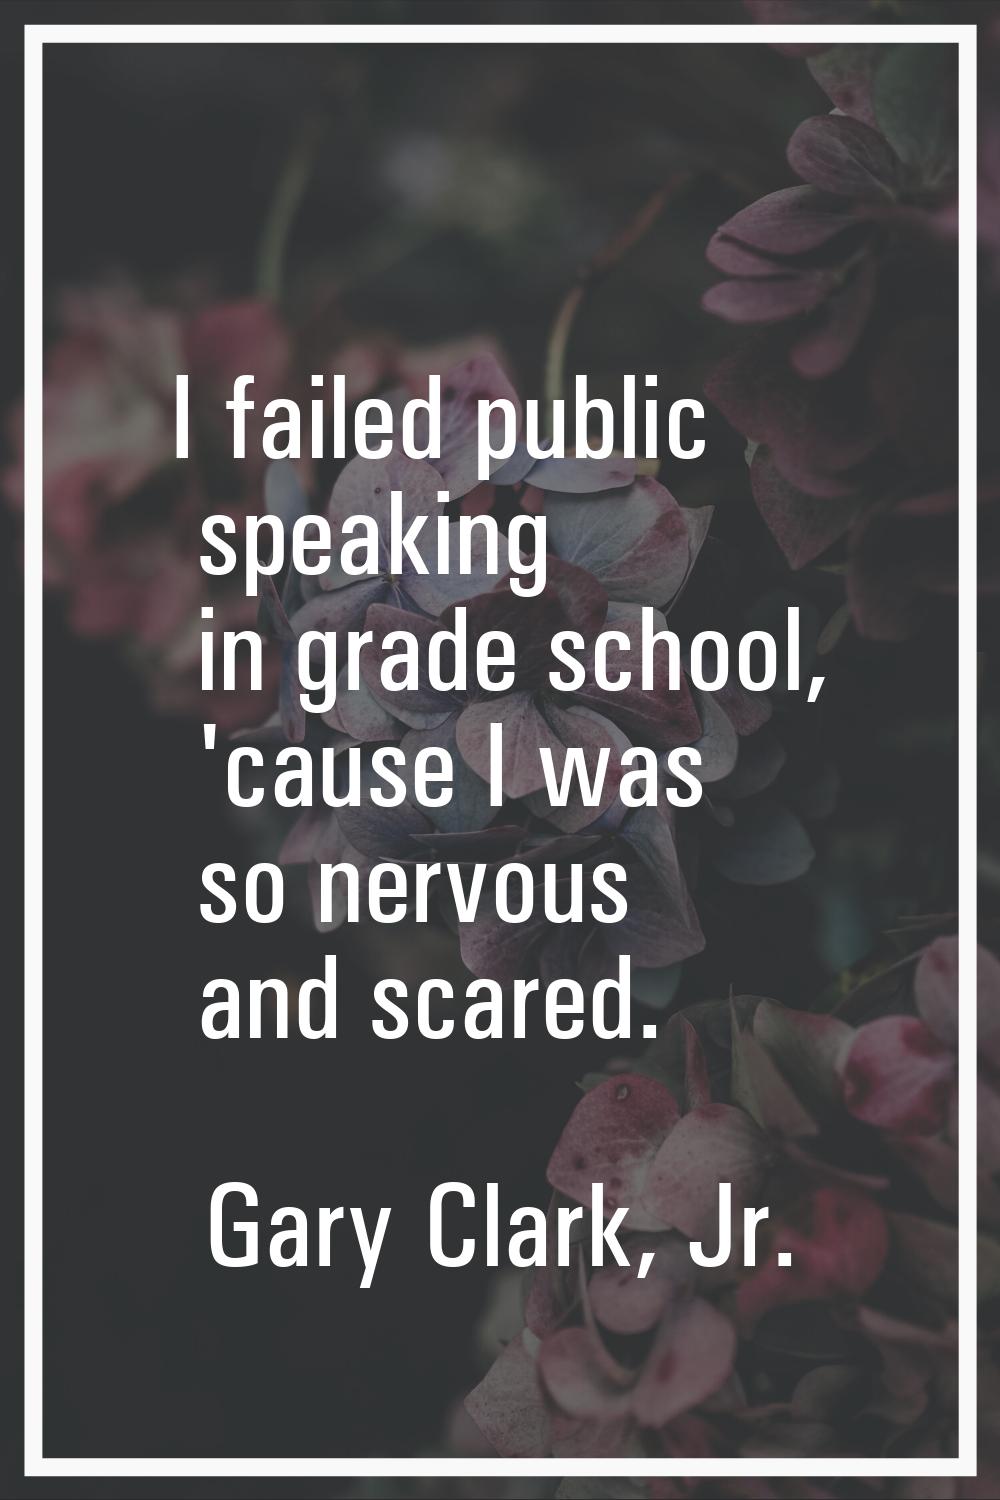 I failed public speaking in grade school, 'cause I was so nervous and scared.